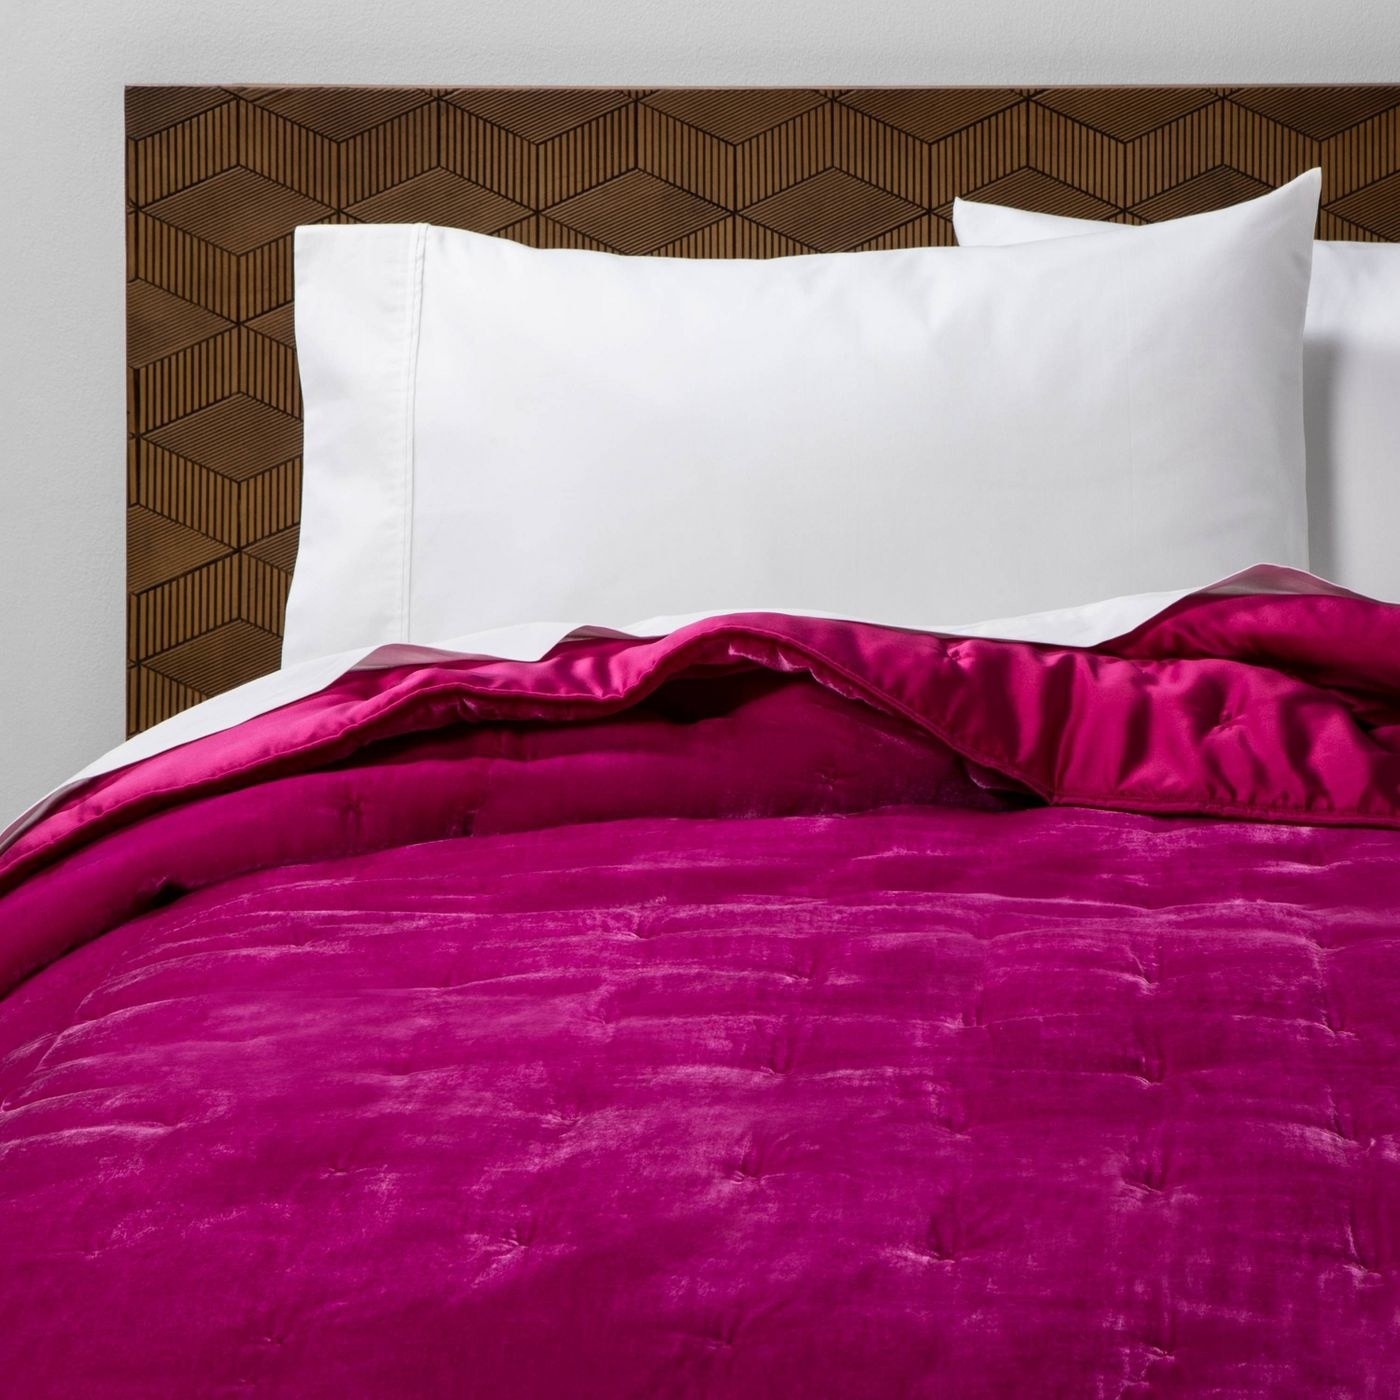 A velvet fuchsia quilt on a brown bed.